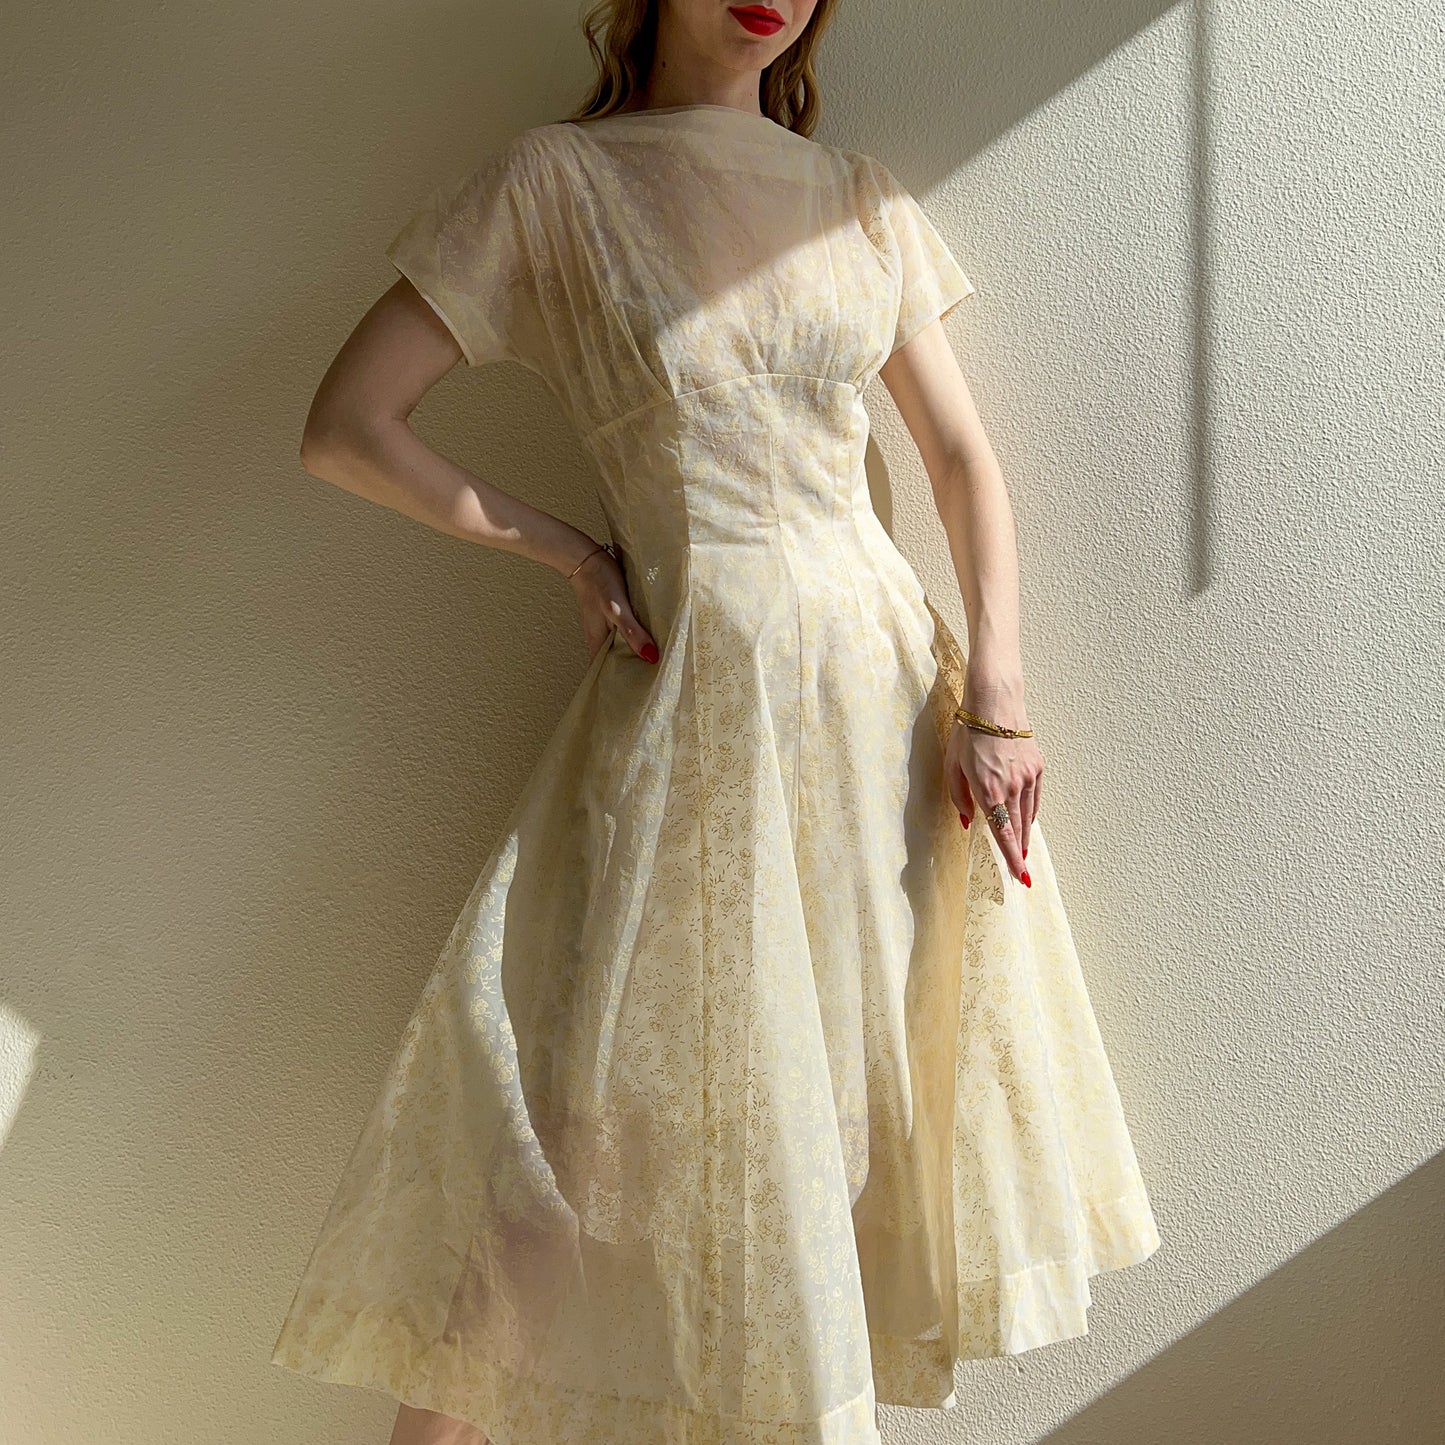 Sheer 1950s White Dainty Florals Cocktail Dress (M/L)